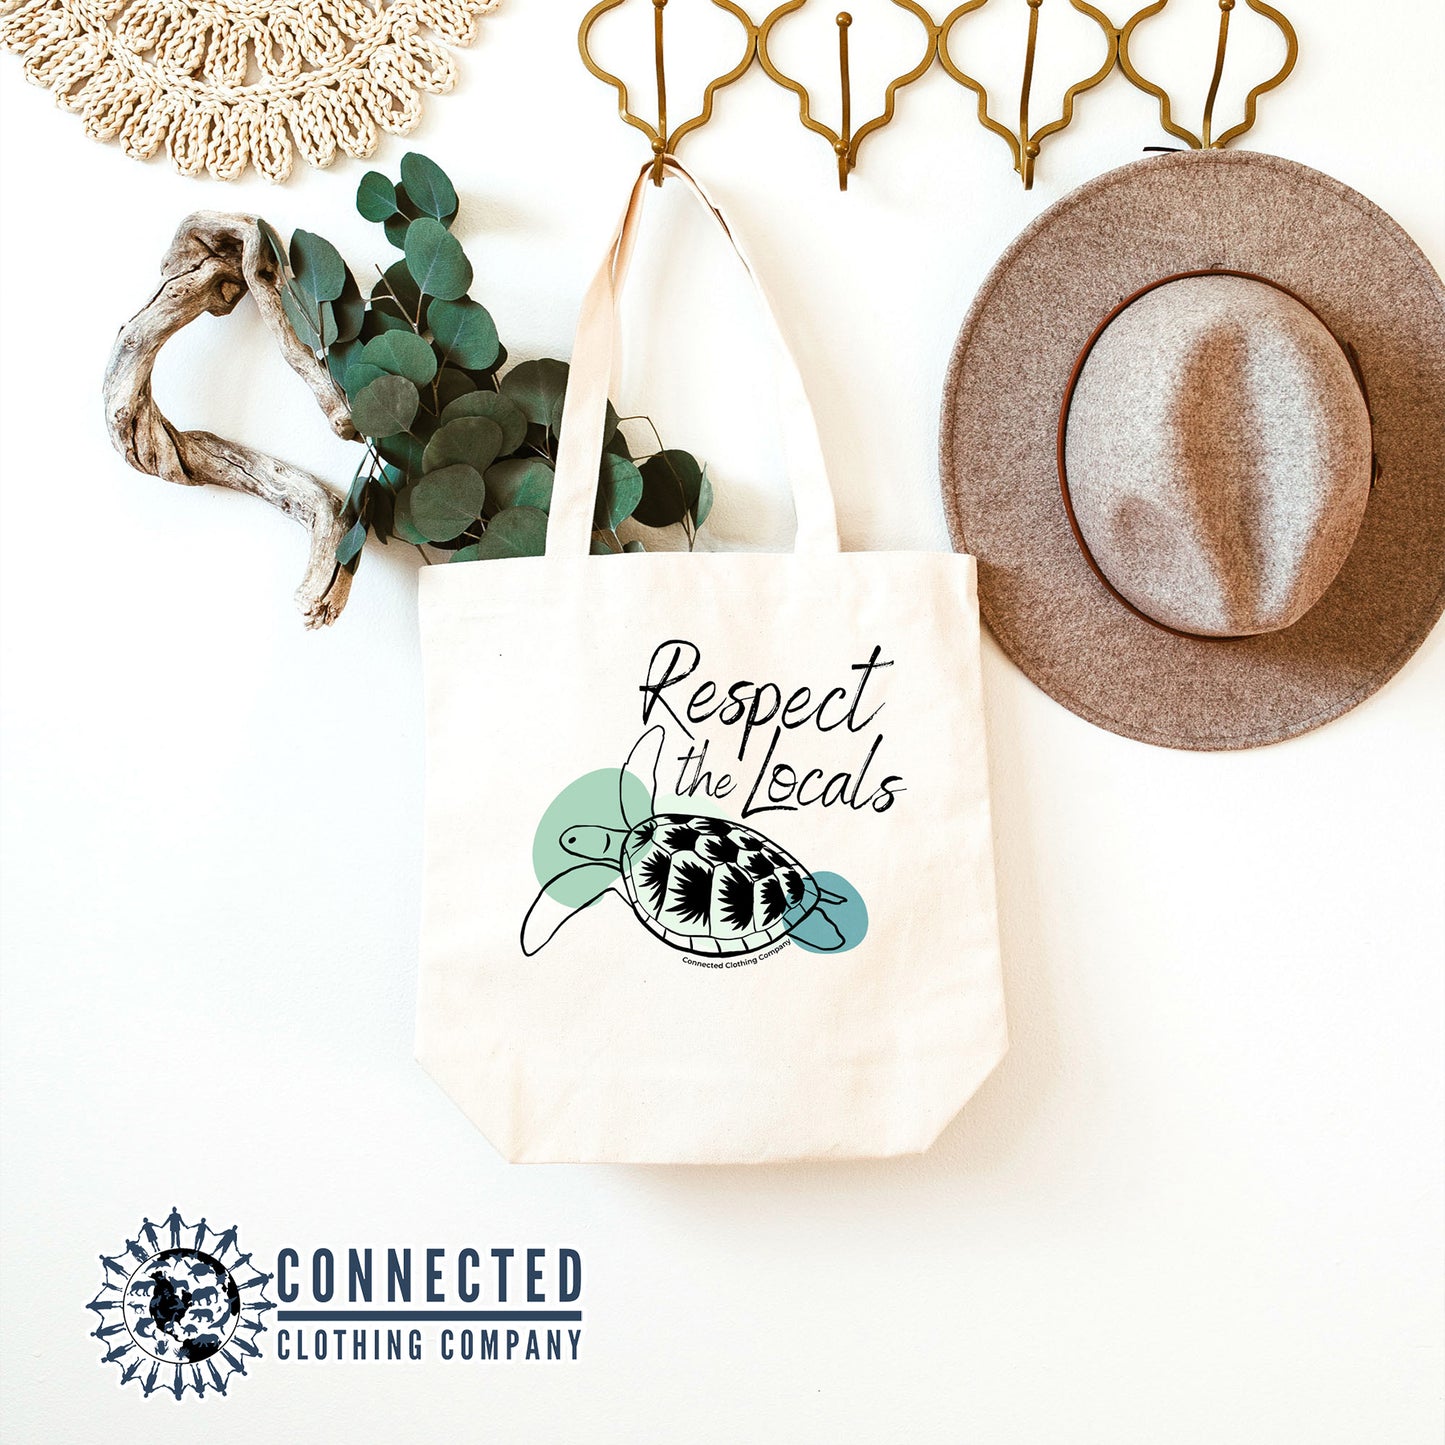 Respect The Locals Sea Turtle Tote Bag - Connected Clothing Company - 10% of proceeds donated to sea turtle conservation